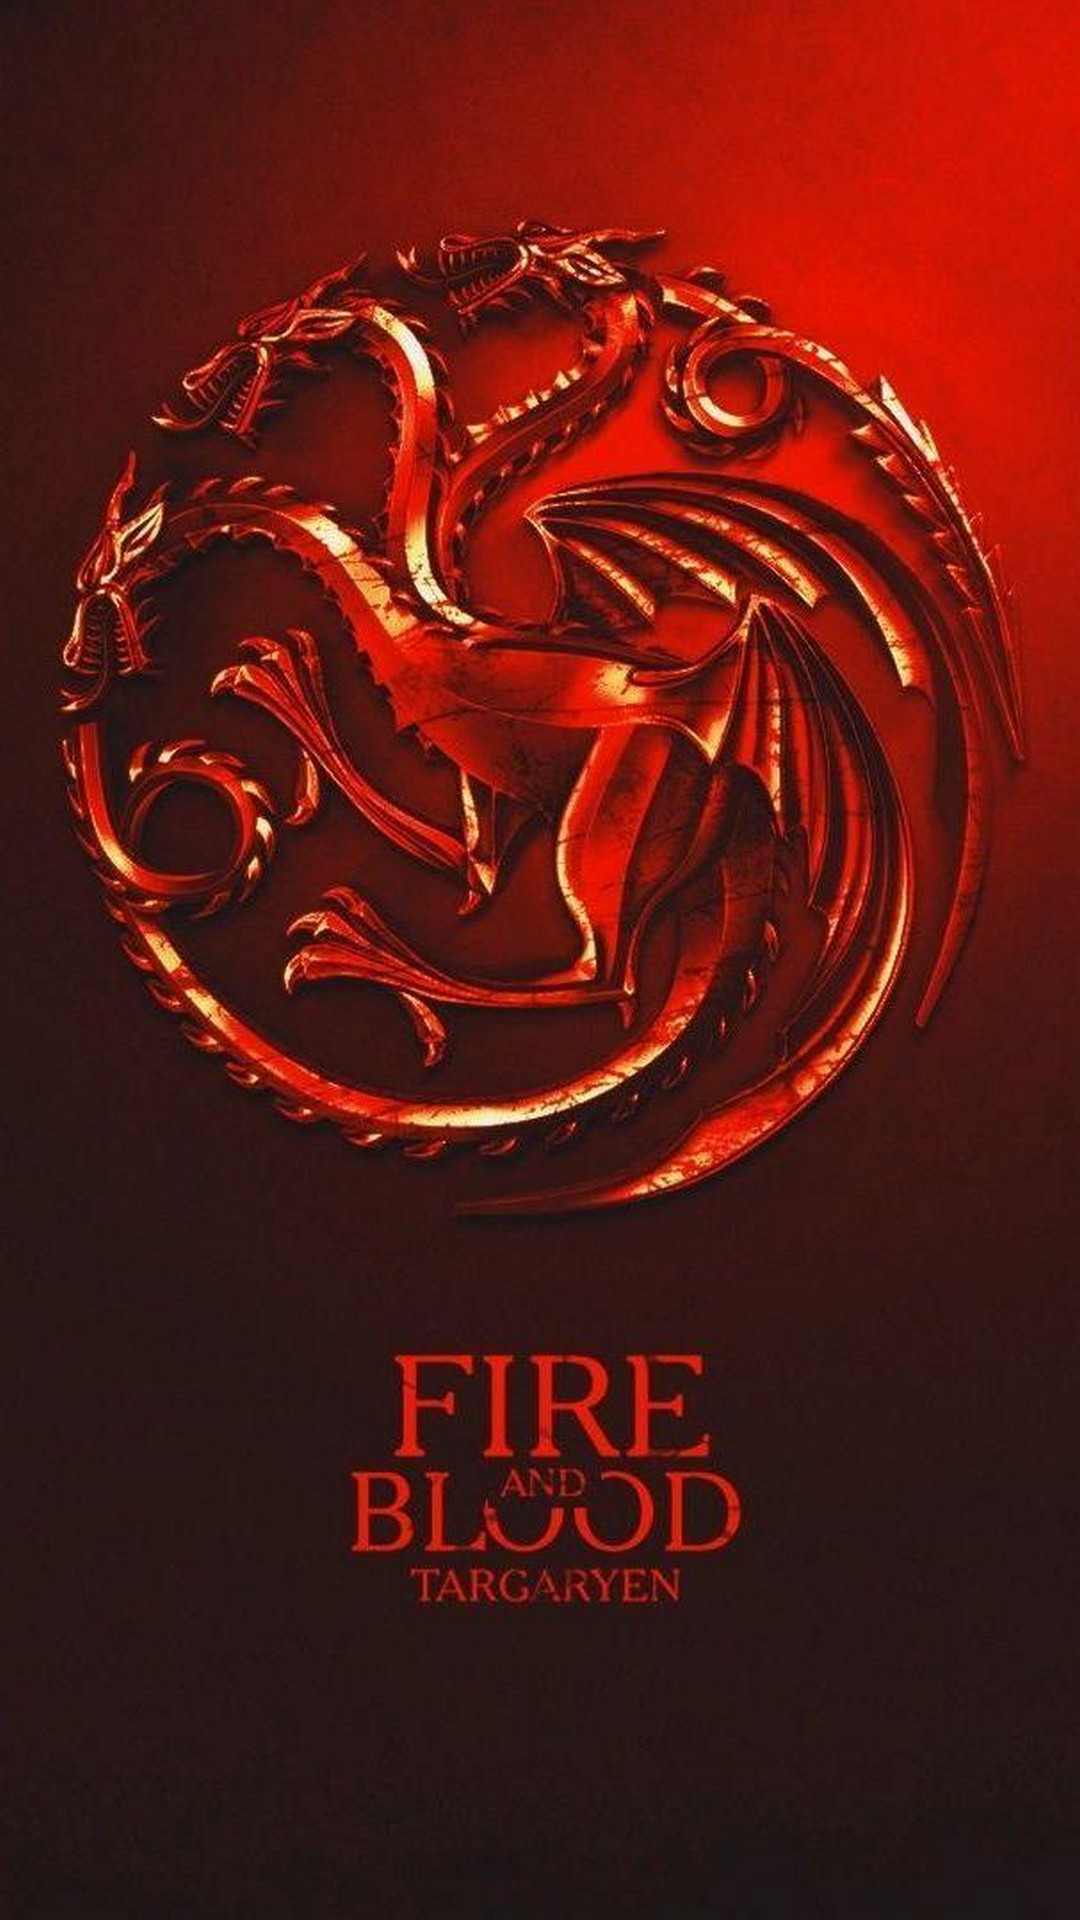 House Targaryen Game of Thrones iPhone Wallpaper With high-resolution 1080X1920 pixel. You can use this wallpaper for your iPhone 5, 6, 7, 8, X, XS, XR backgrounds, Mobile Screensaver, or iPad Lock Screen